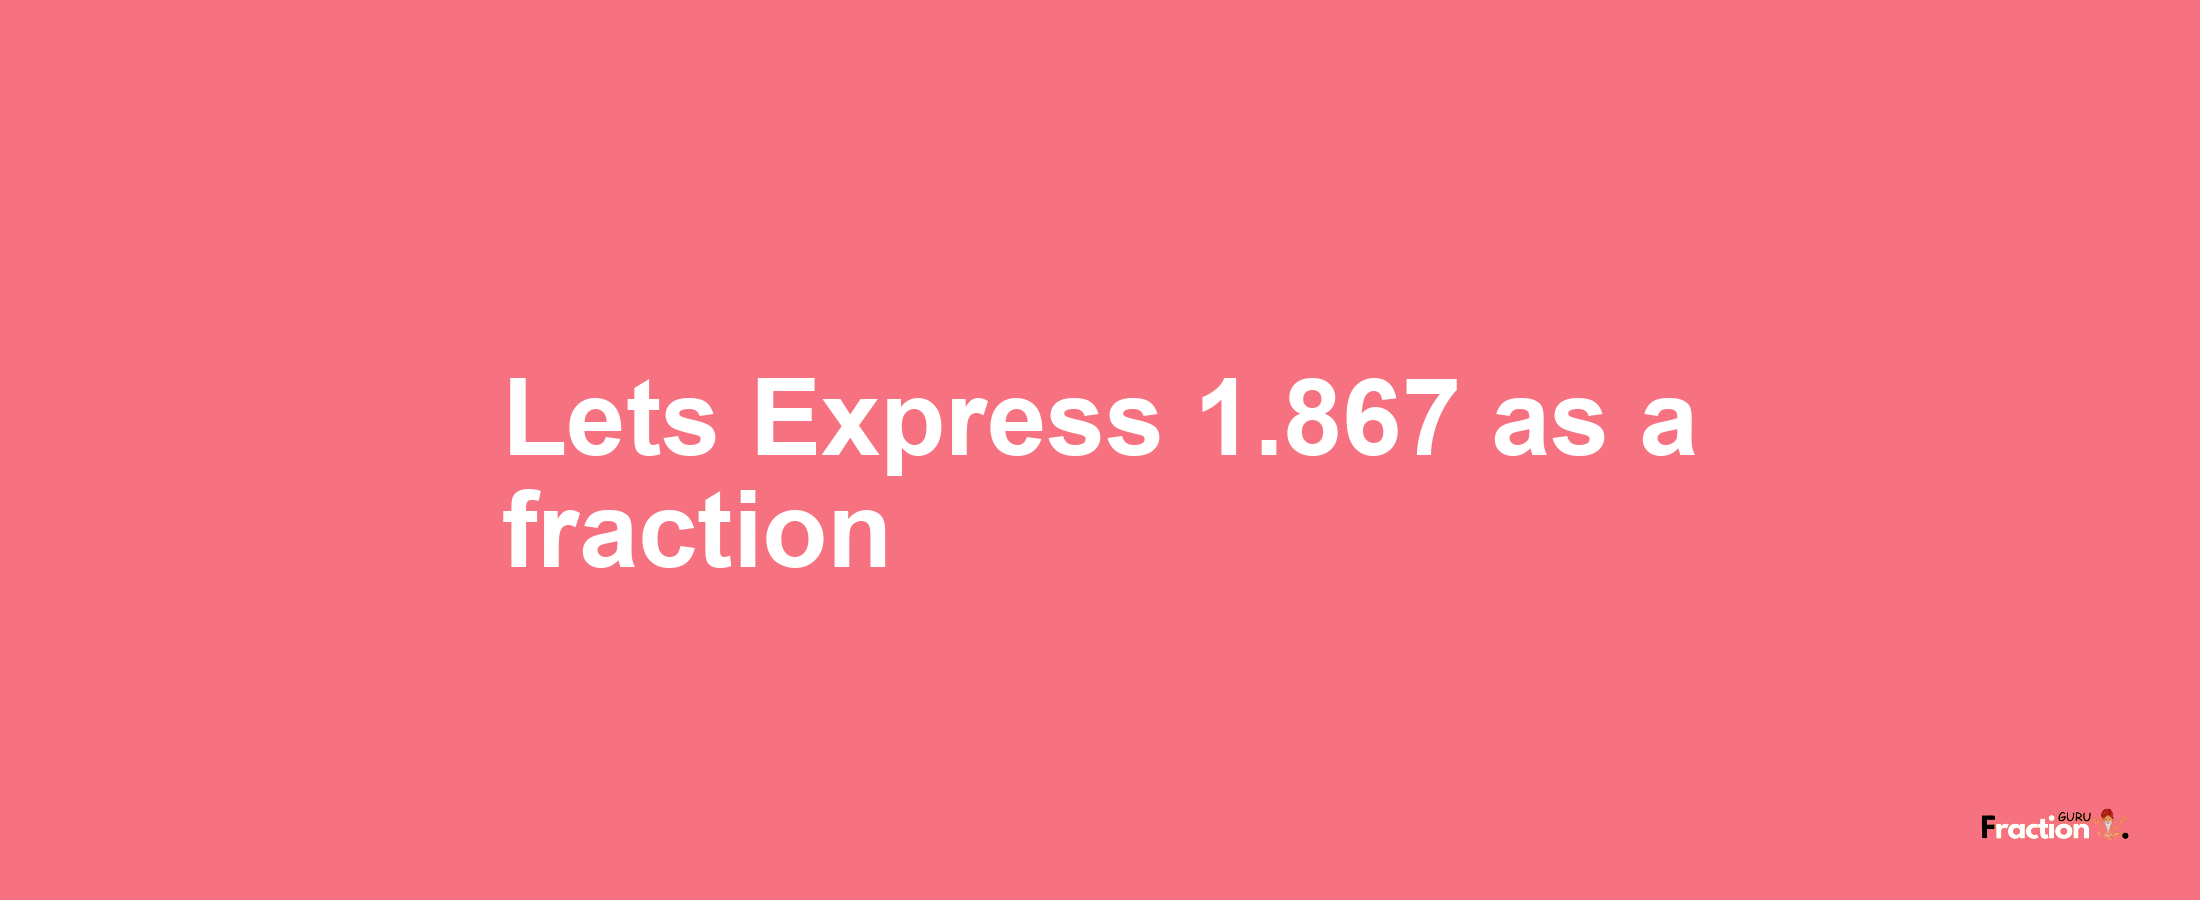 Lets Express 1.867 as afraction